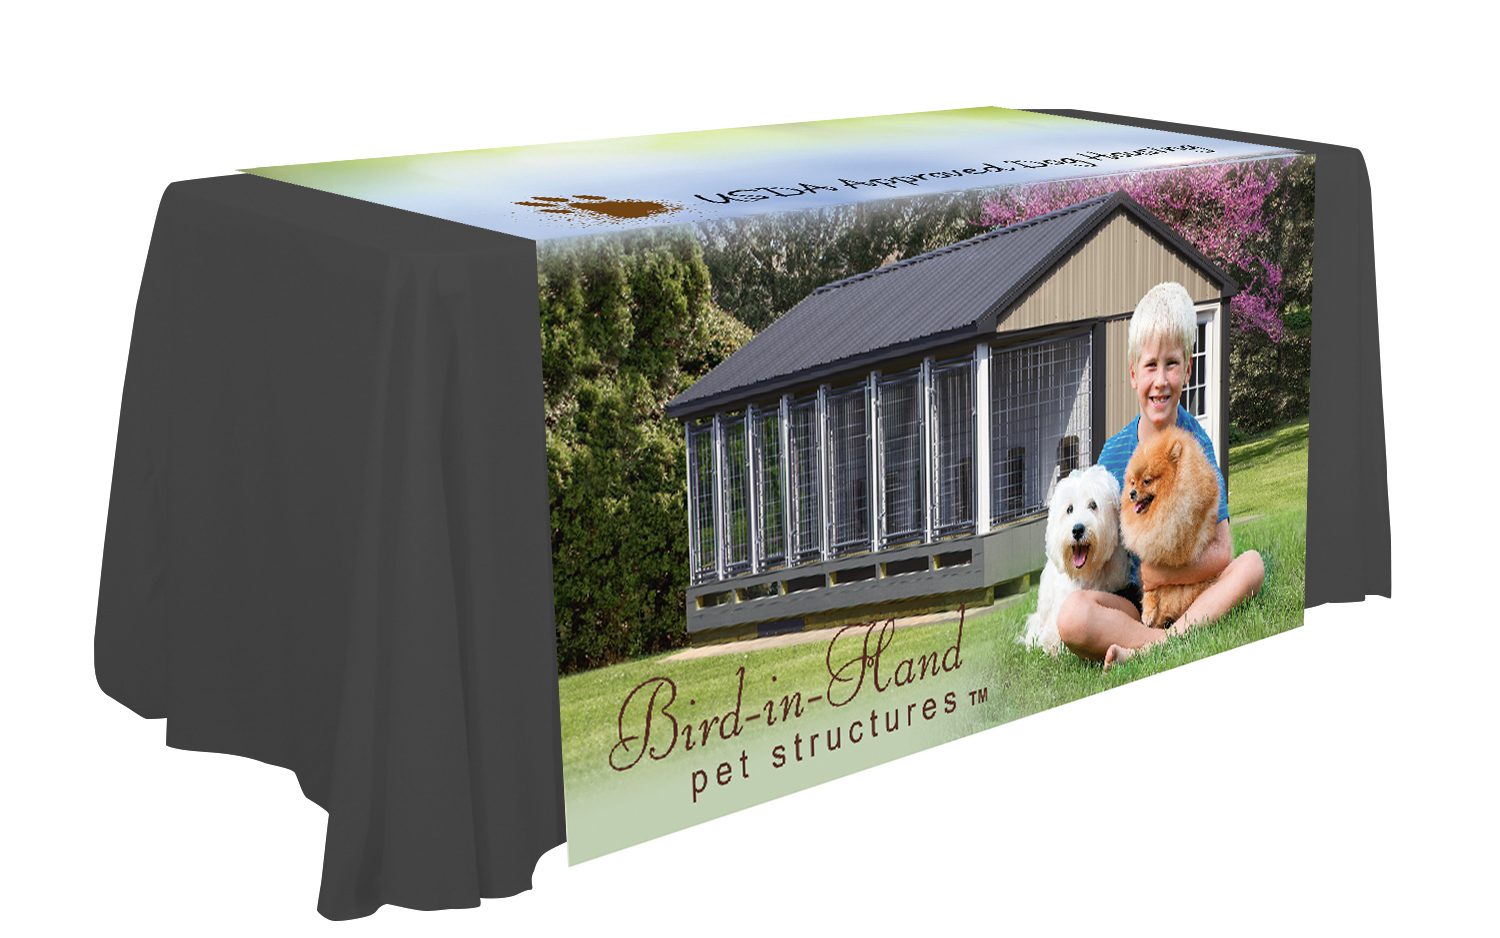 Bird-in-Hand pet structures table display cloth